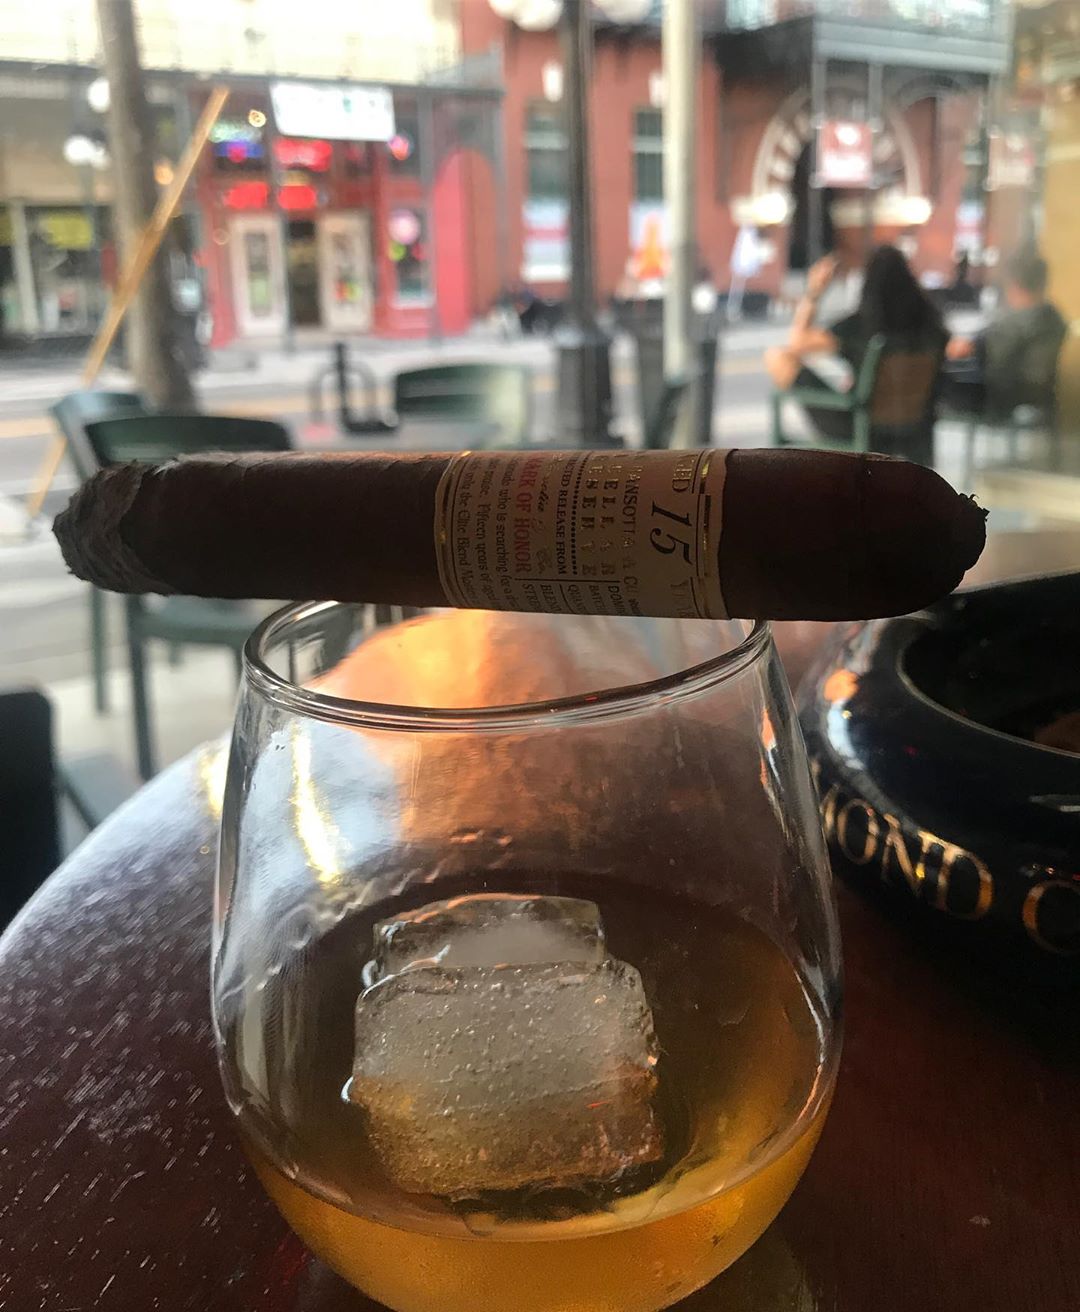 Cigar on top of a glass. Photo by Instagram user @justin_klingbeil14